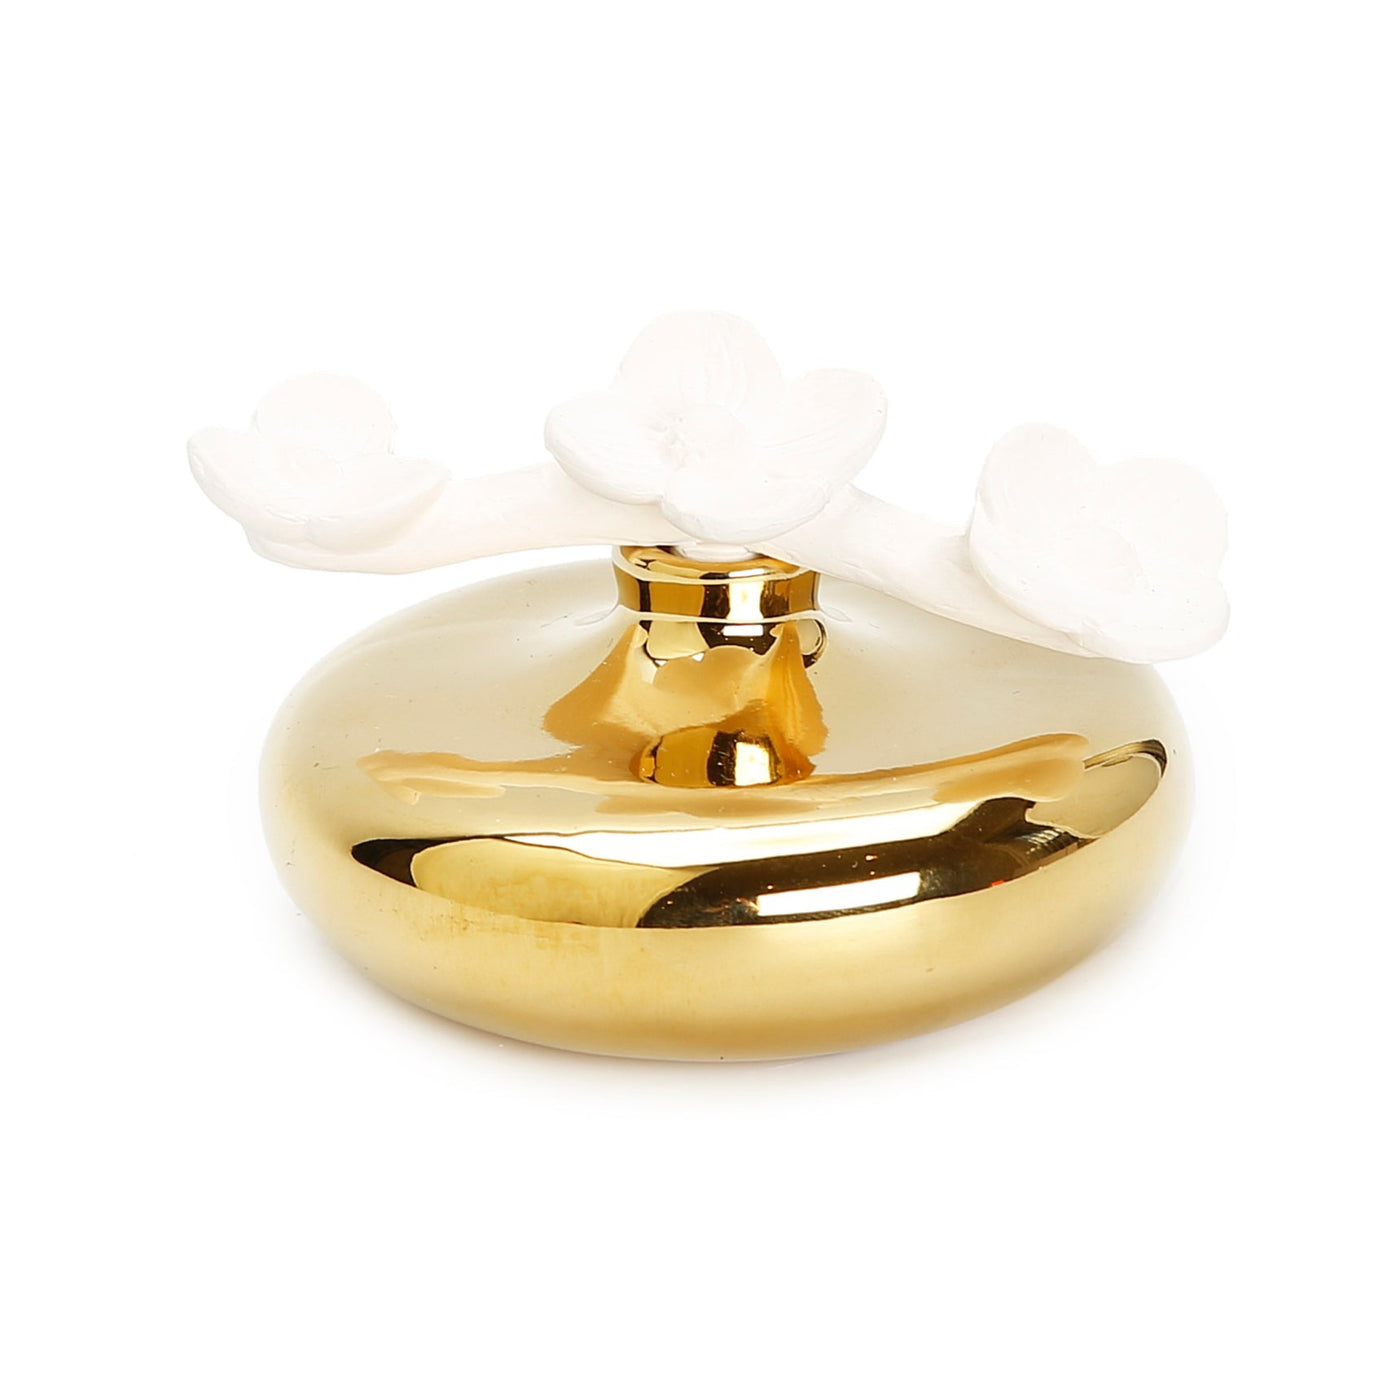 Gold Circular Diffuser with Three White Flowers, "Iris & Rose" scent